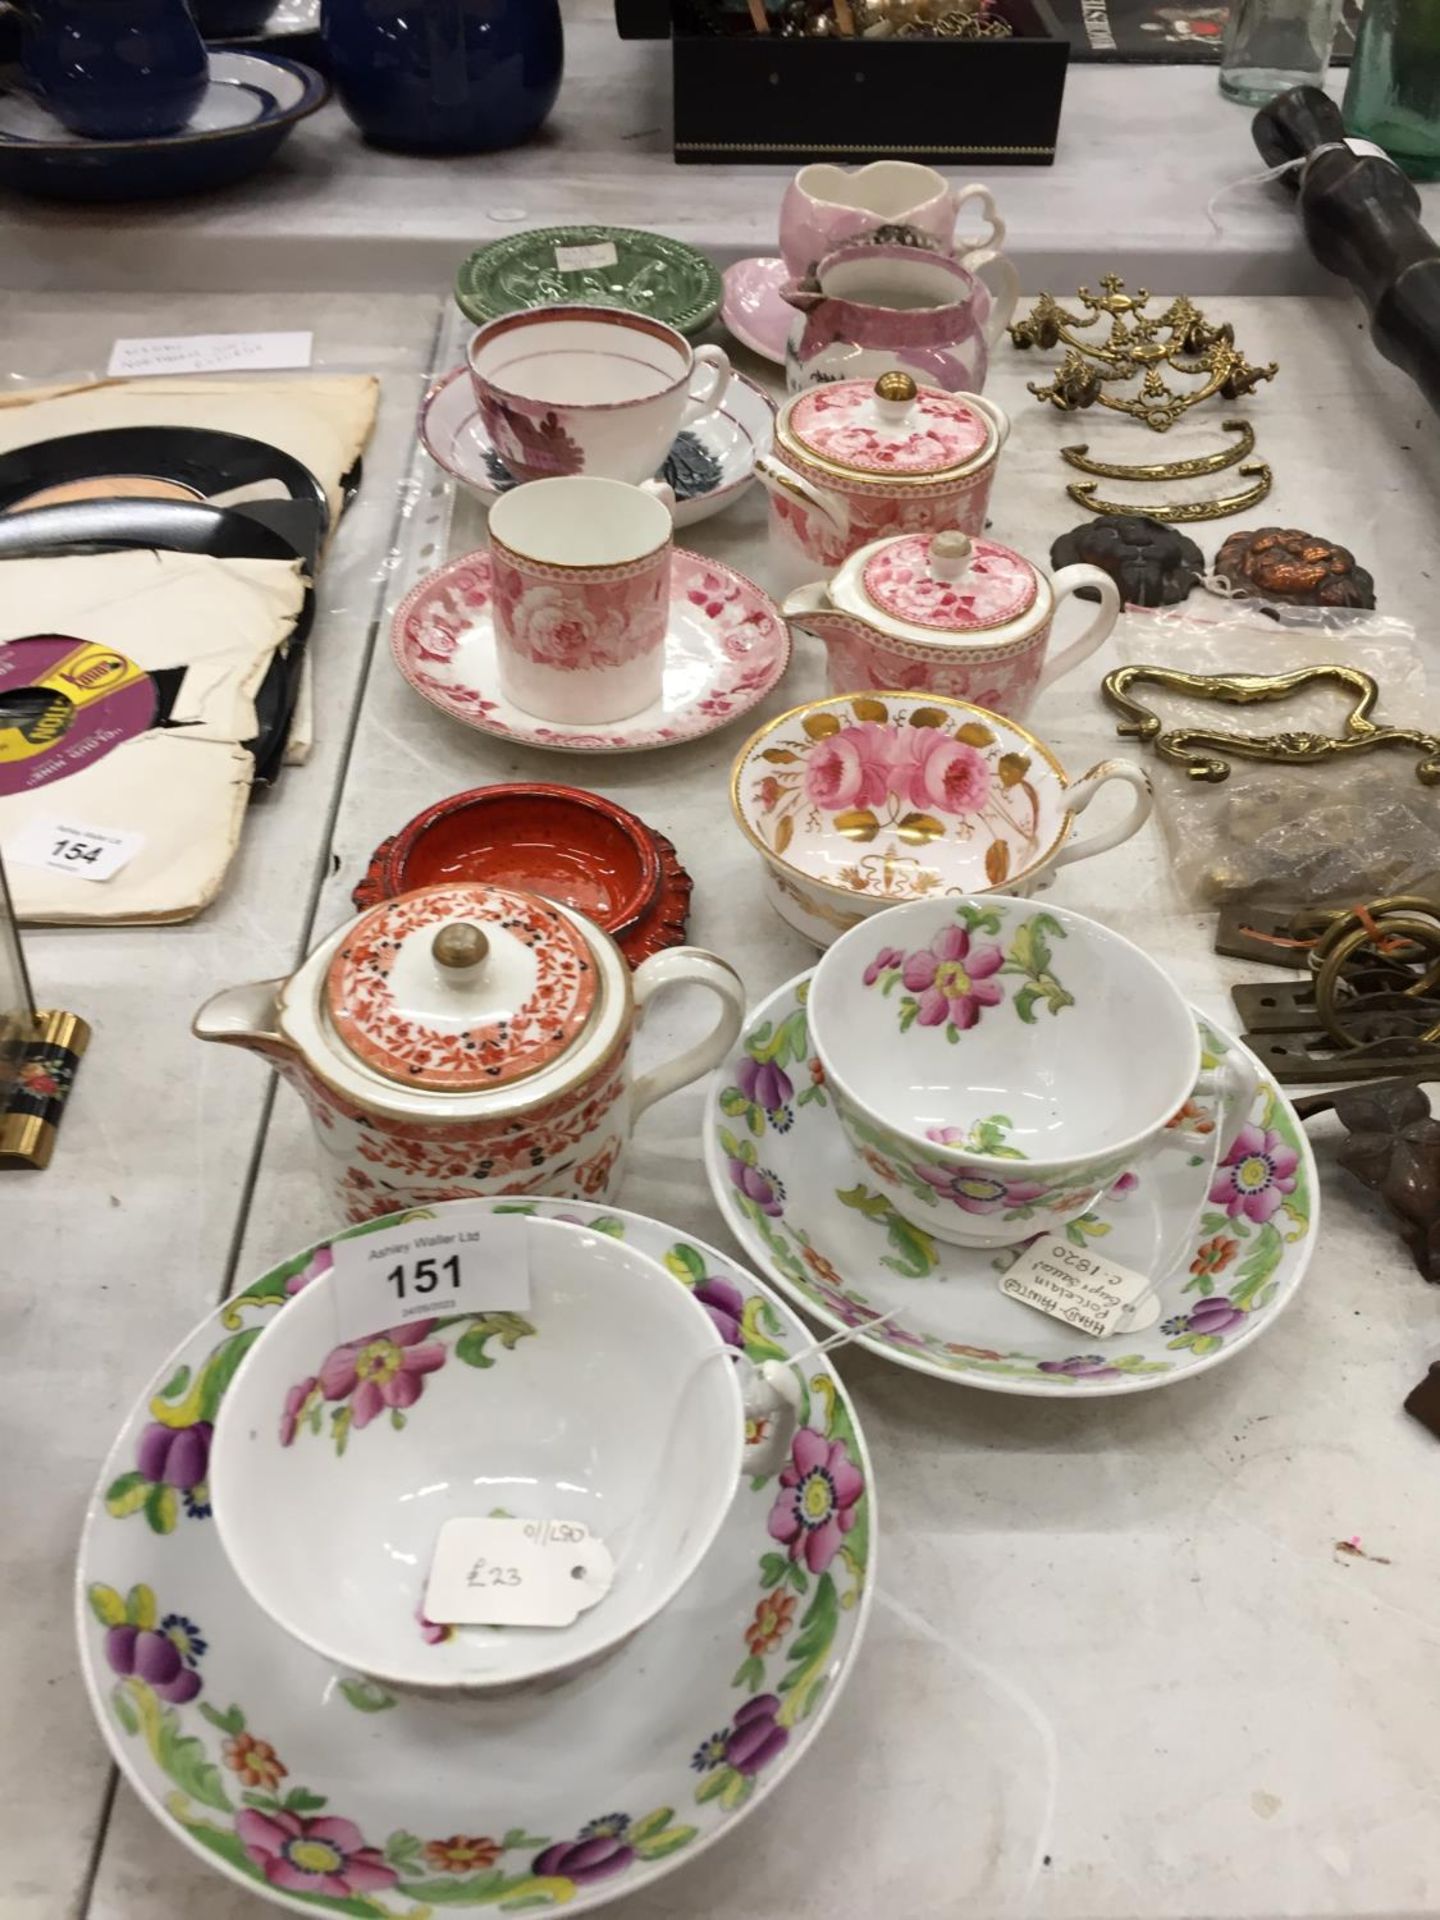 A QUANTITY OF ANTIQUE AND VINTAGE CHINA CUPS AND SAUCERS TO INCLUDE WEDGWOOD JUGS, SUGAR BOWL, CUP - Image 2 of 4